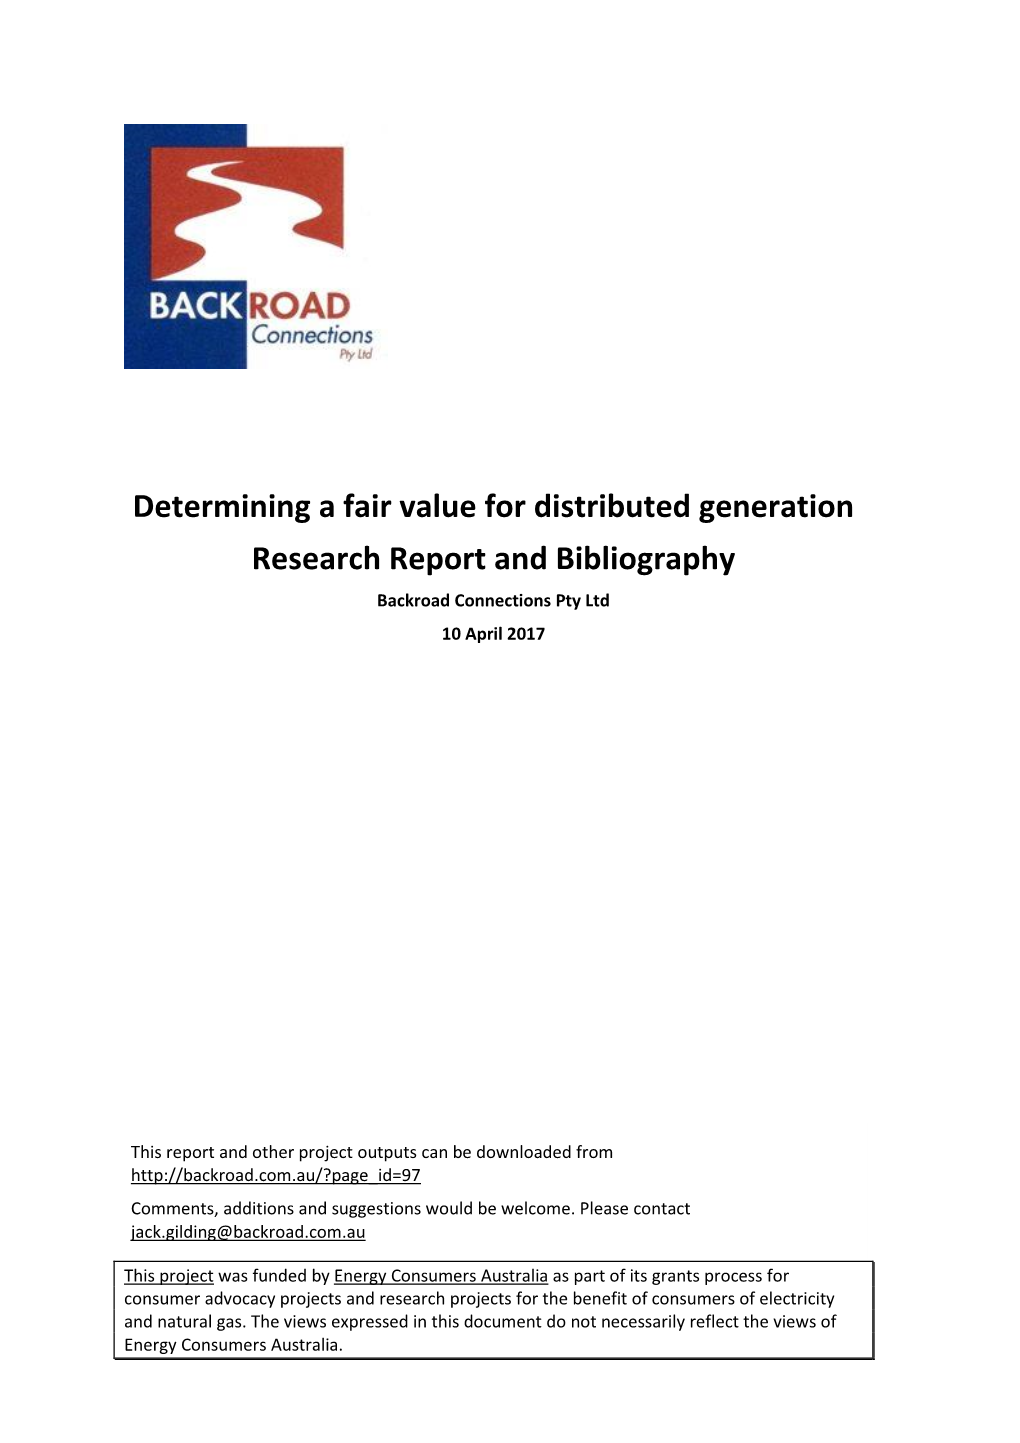 Determining a Fair Value for Distributed Generation: Research Report and Bibliography